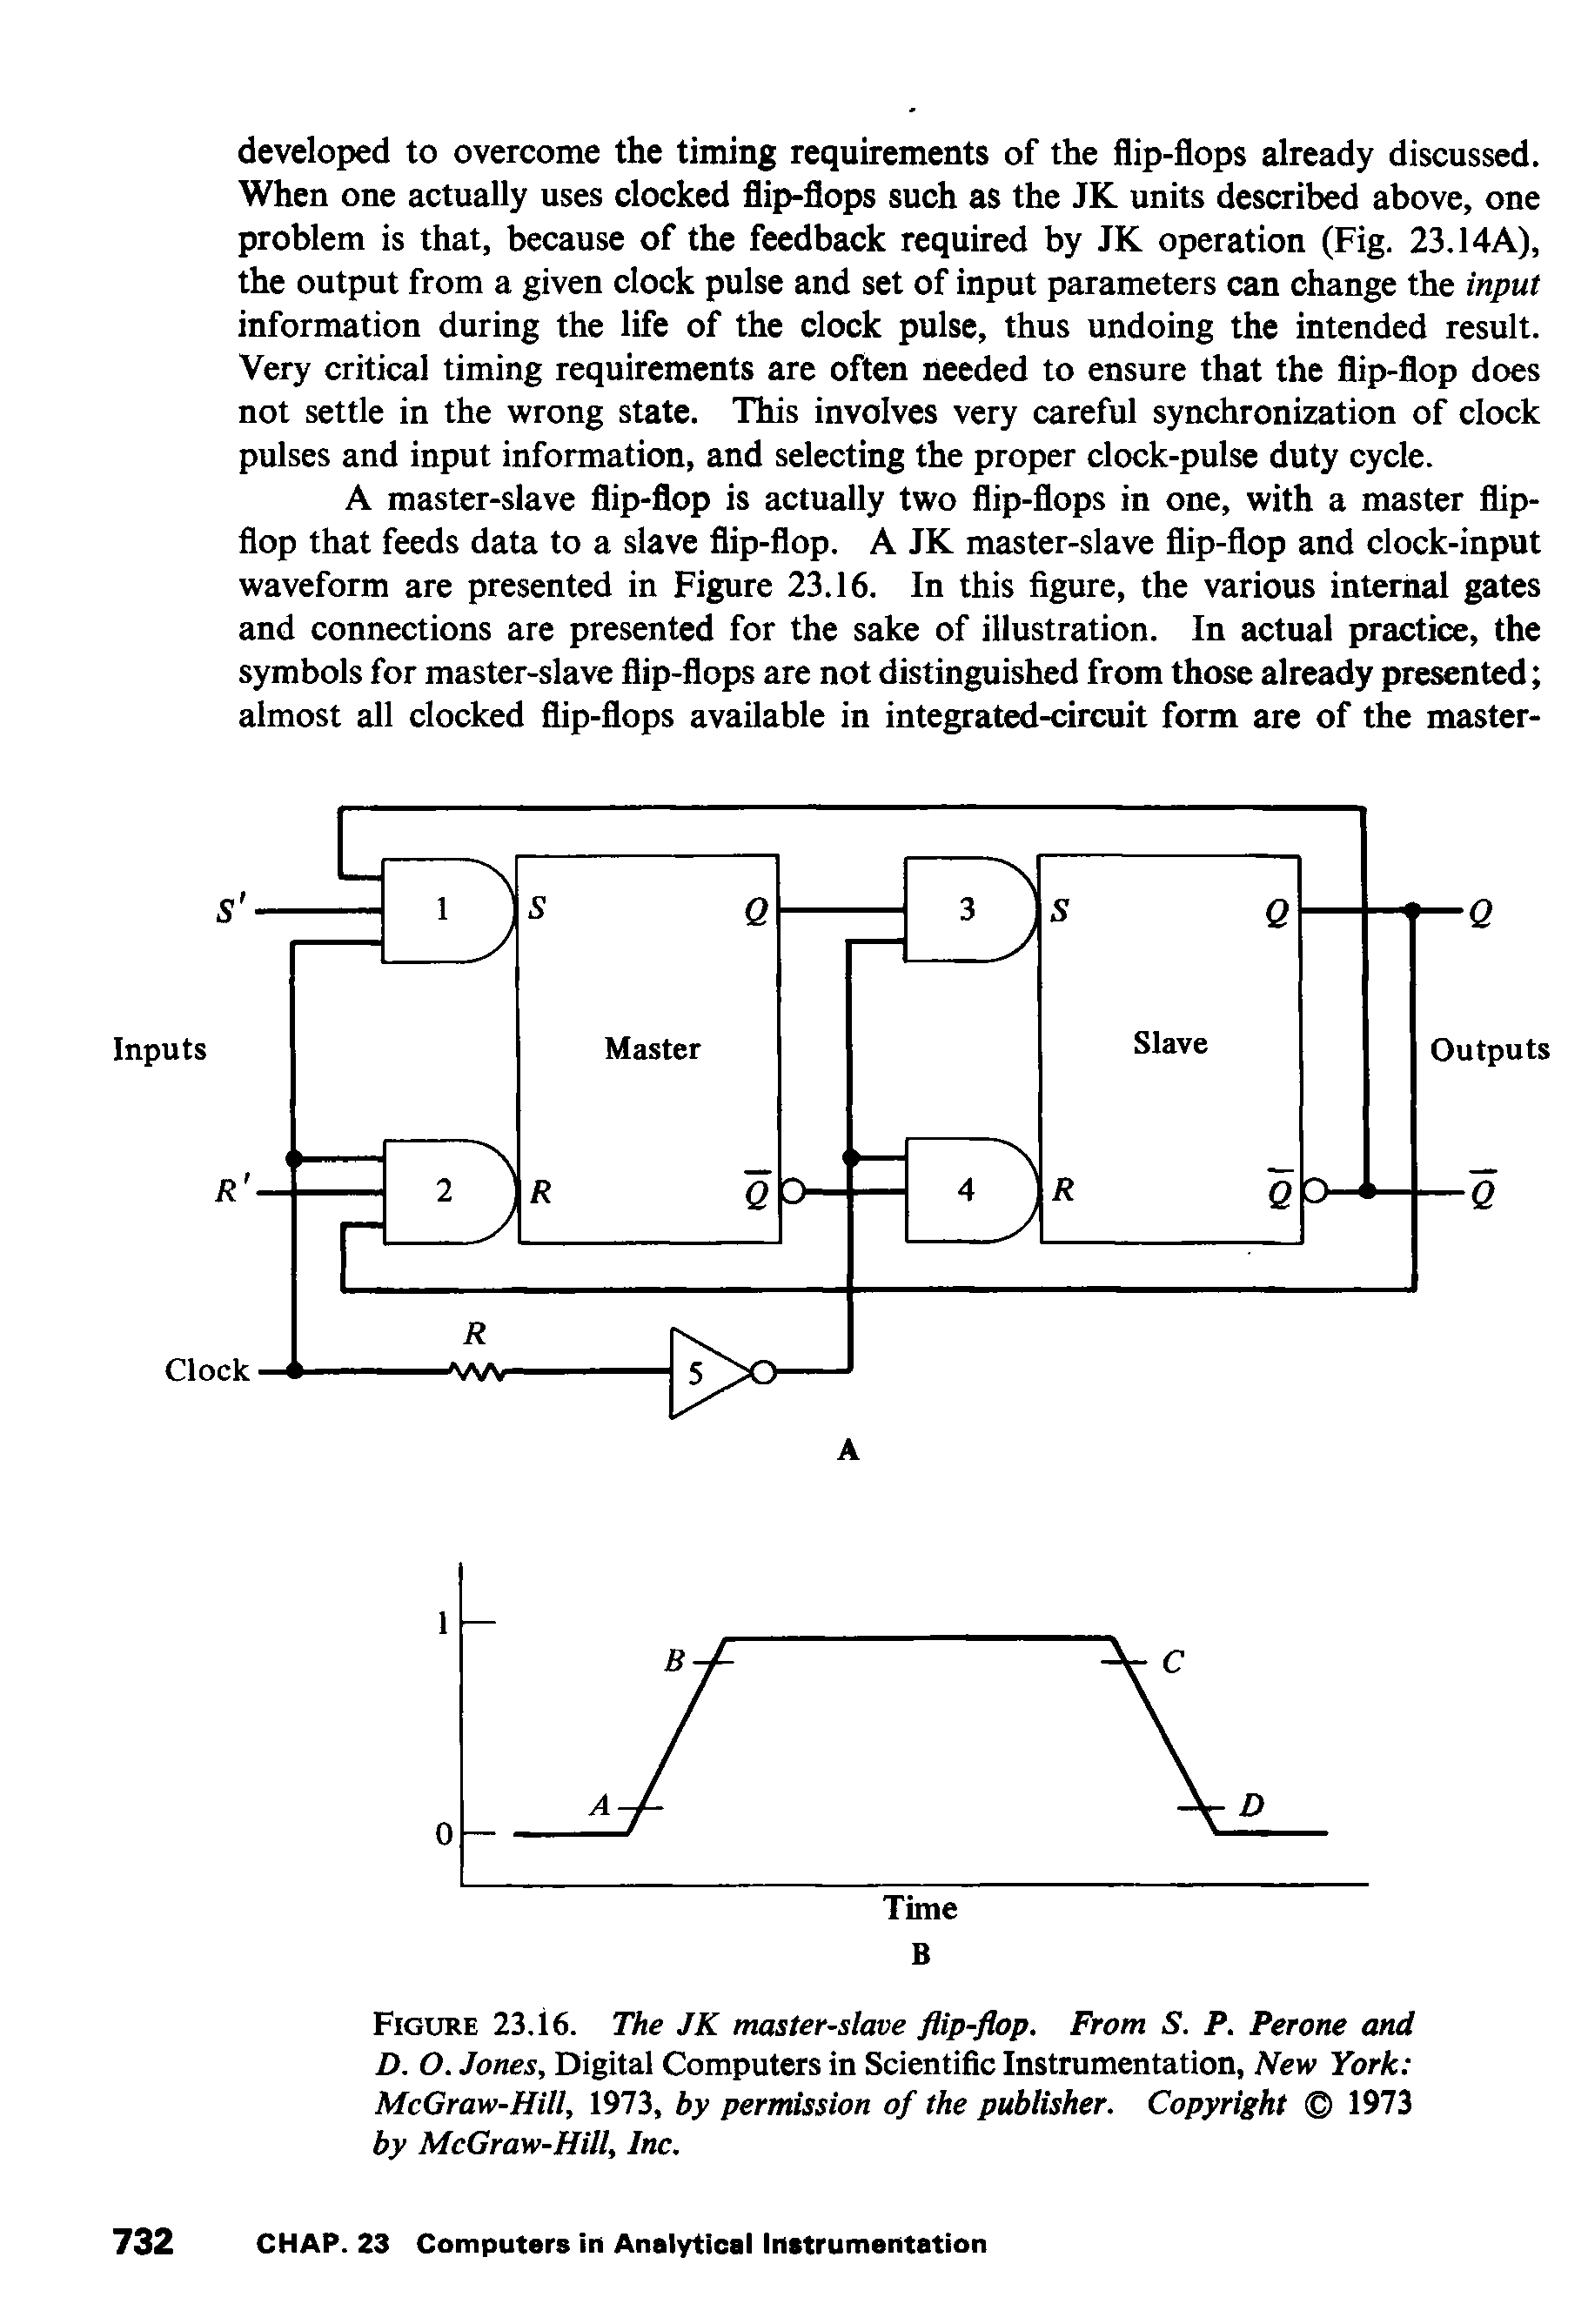 Figure 23.16. The JK master-slave flip-flop. From S. P. Perone and D. O. Jones, Digital Computers in Scientific Instrumentation, New York McGraw-Hill, 1973, by permission of the publisher. Copyright 1973 by McGraw-Hill, Inc.